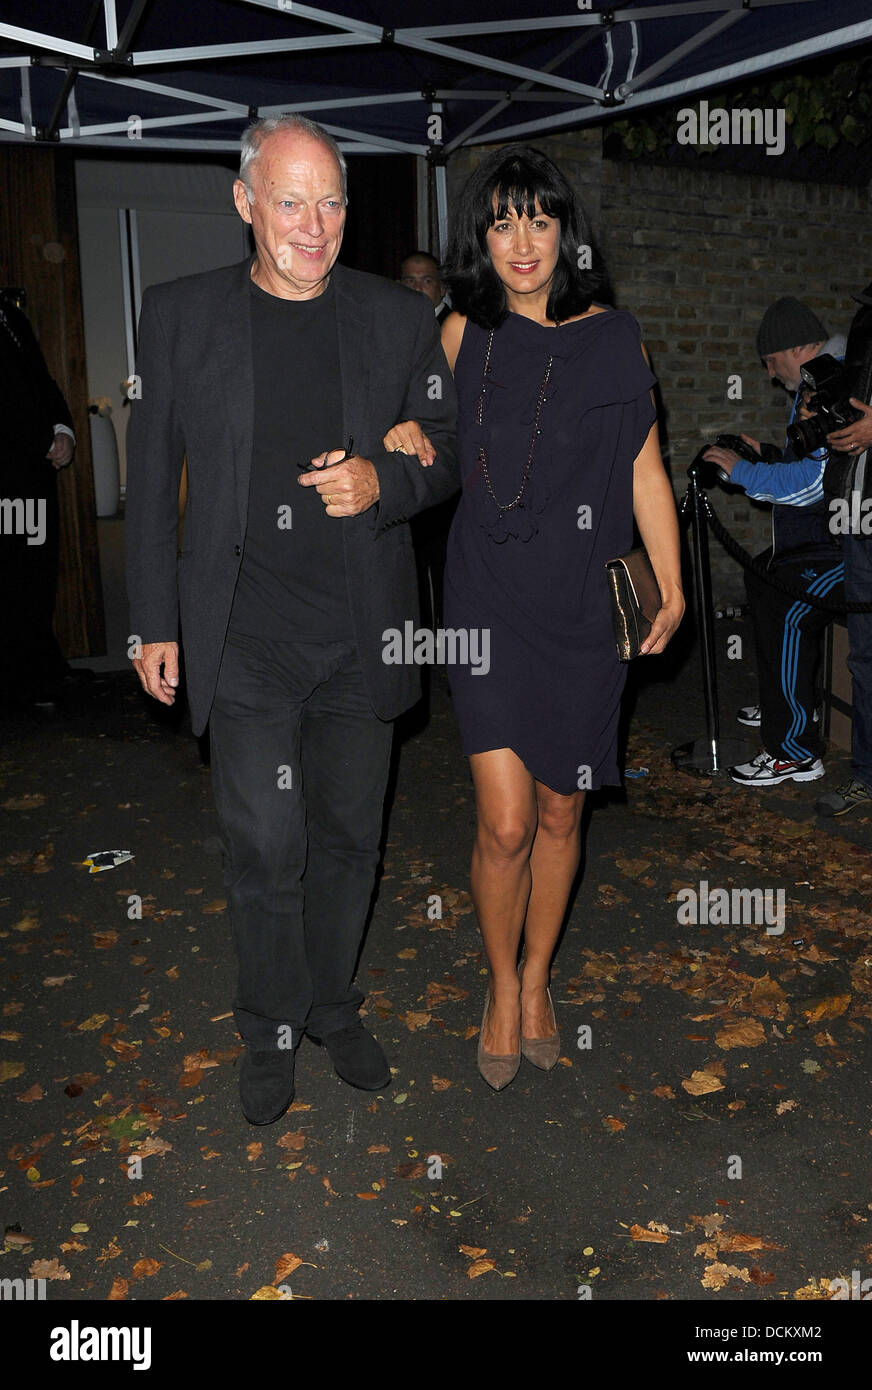 David Gilmour and Polly Samson,  at Paul McCartney and Nancy Shevell's Reception Party held at their home - Departures London, England - 09.10.11 Stock Photo